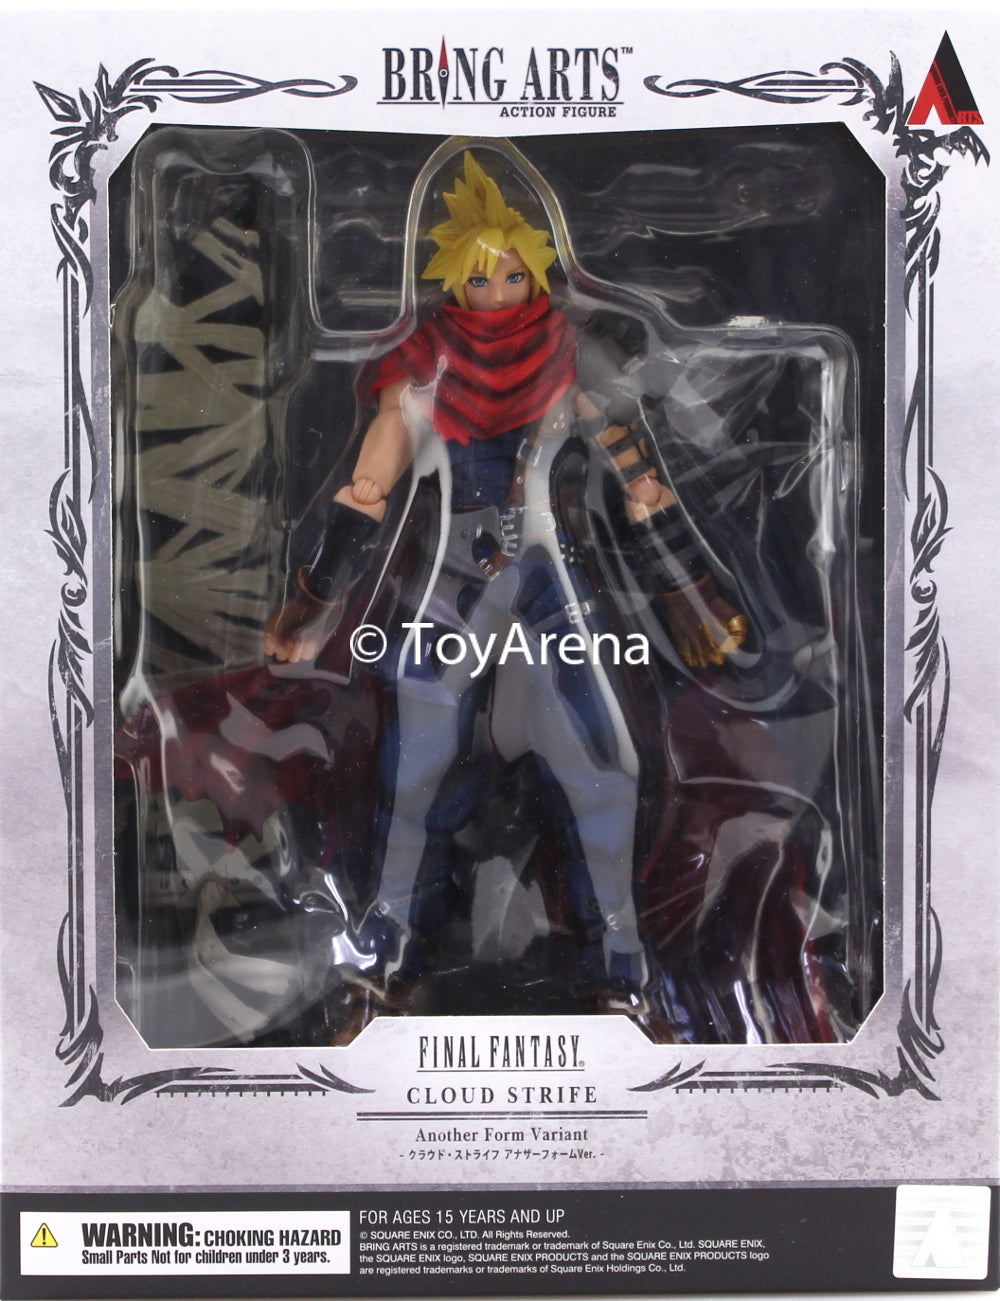 Bring Arts Final Fantasy Cloud Strife (Another Form Variant) Square Enix Figure